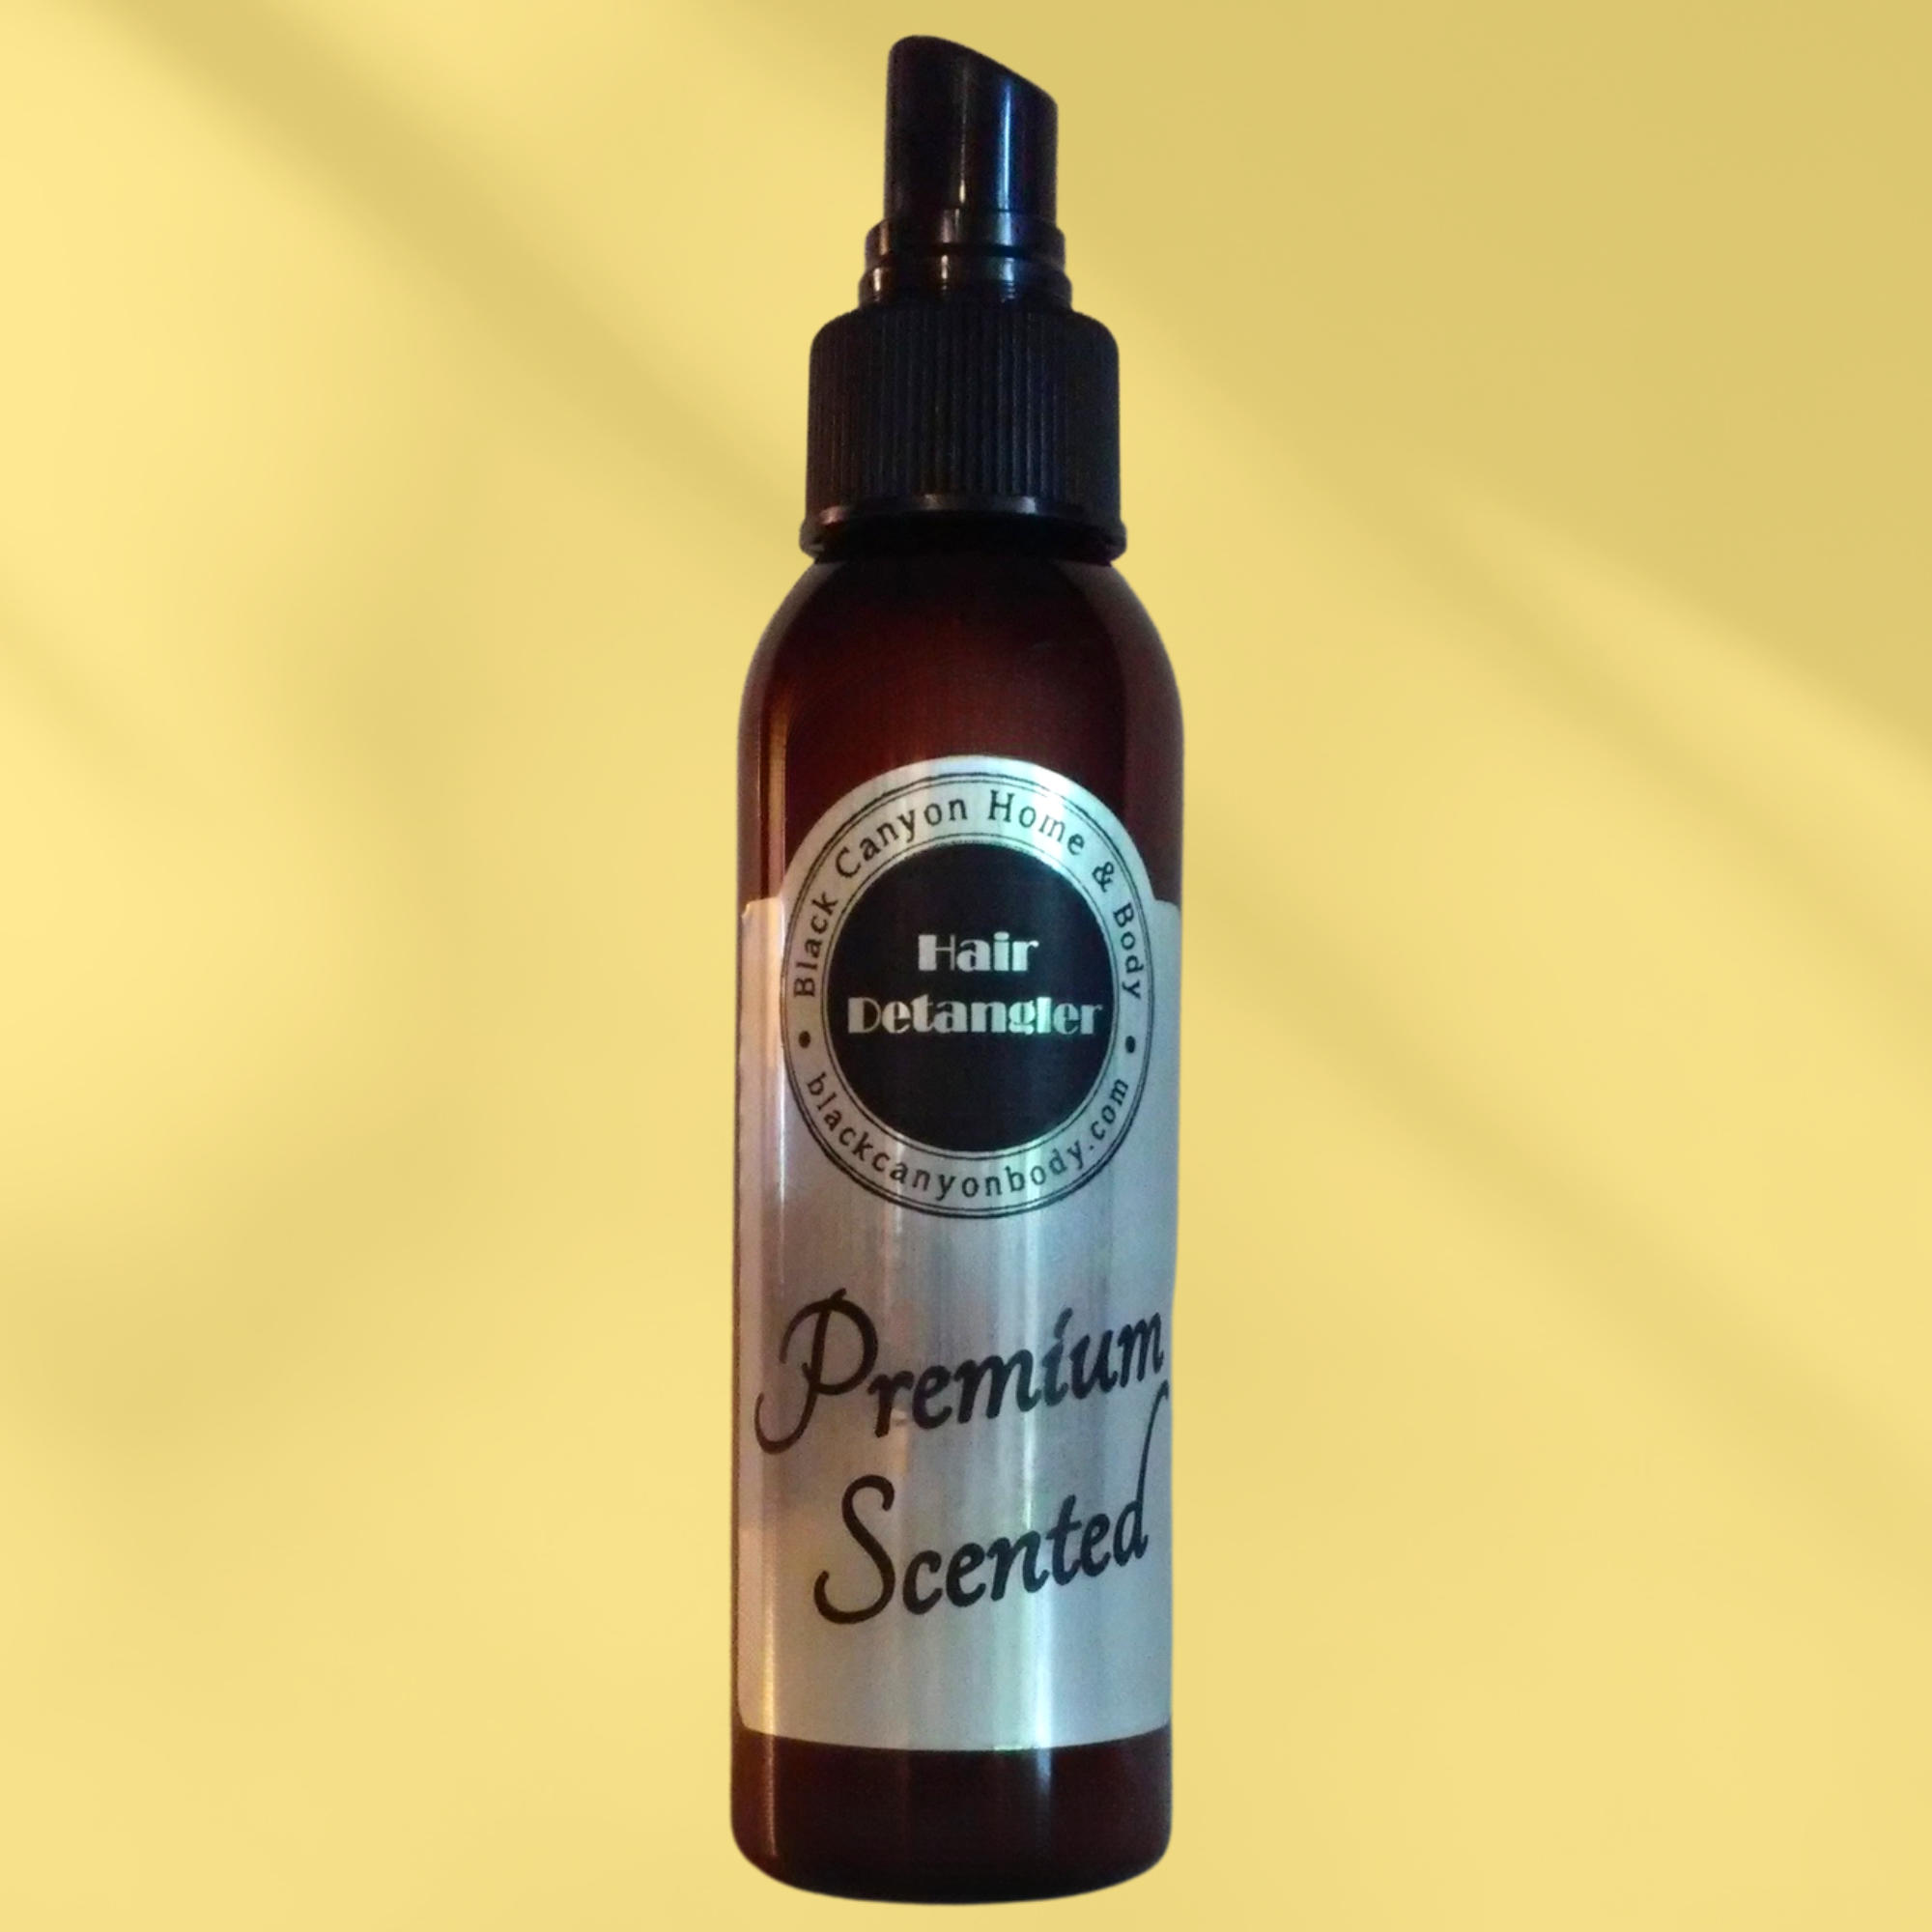 Black Canyon Apples & Acorns Scented Hair Detangler Spray with Olive Oil